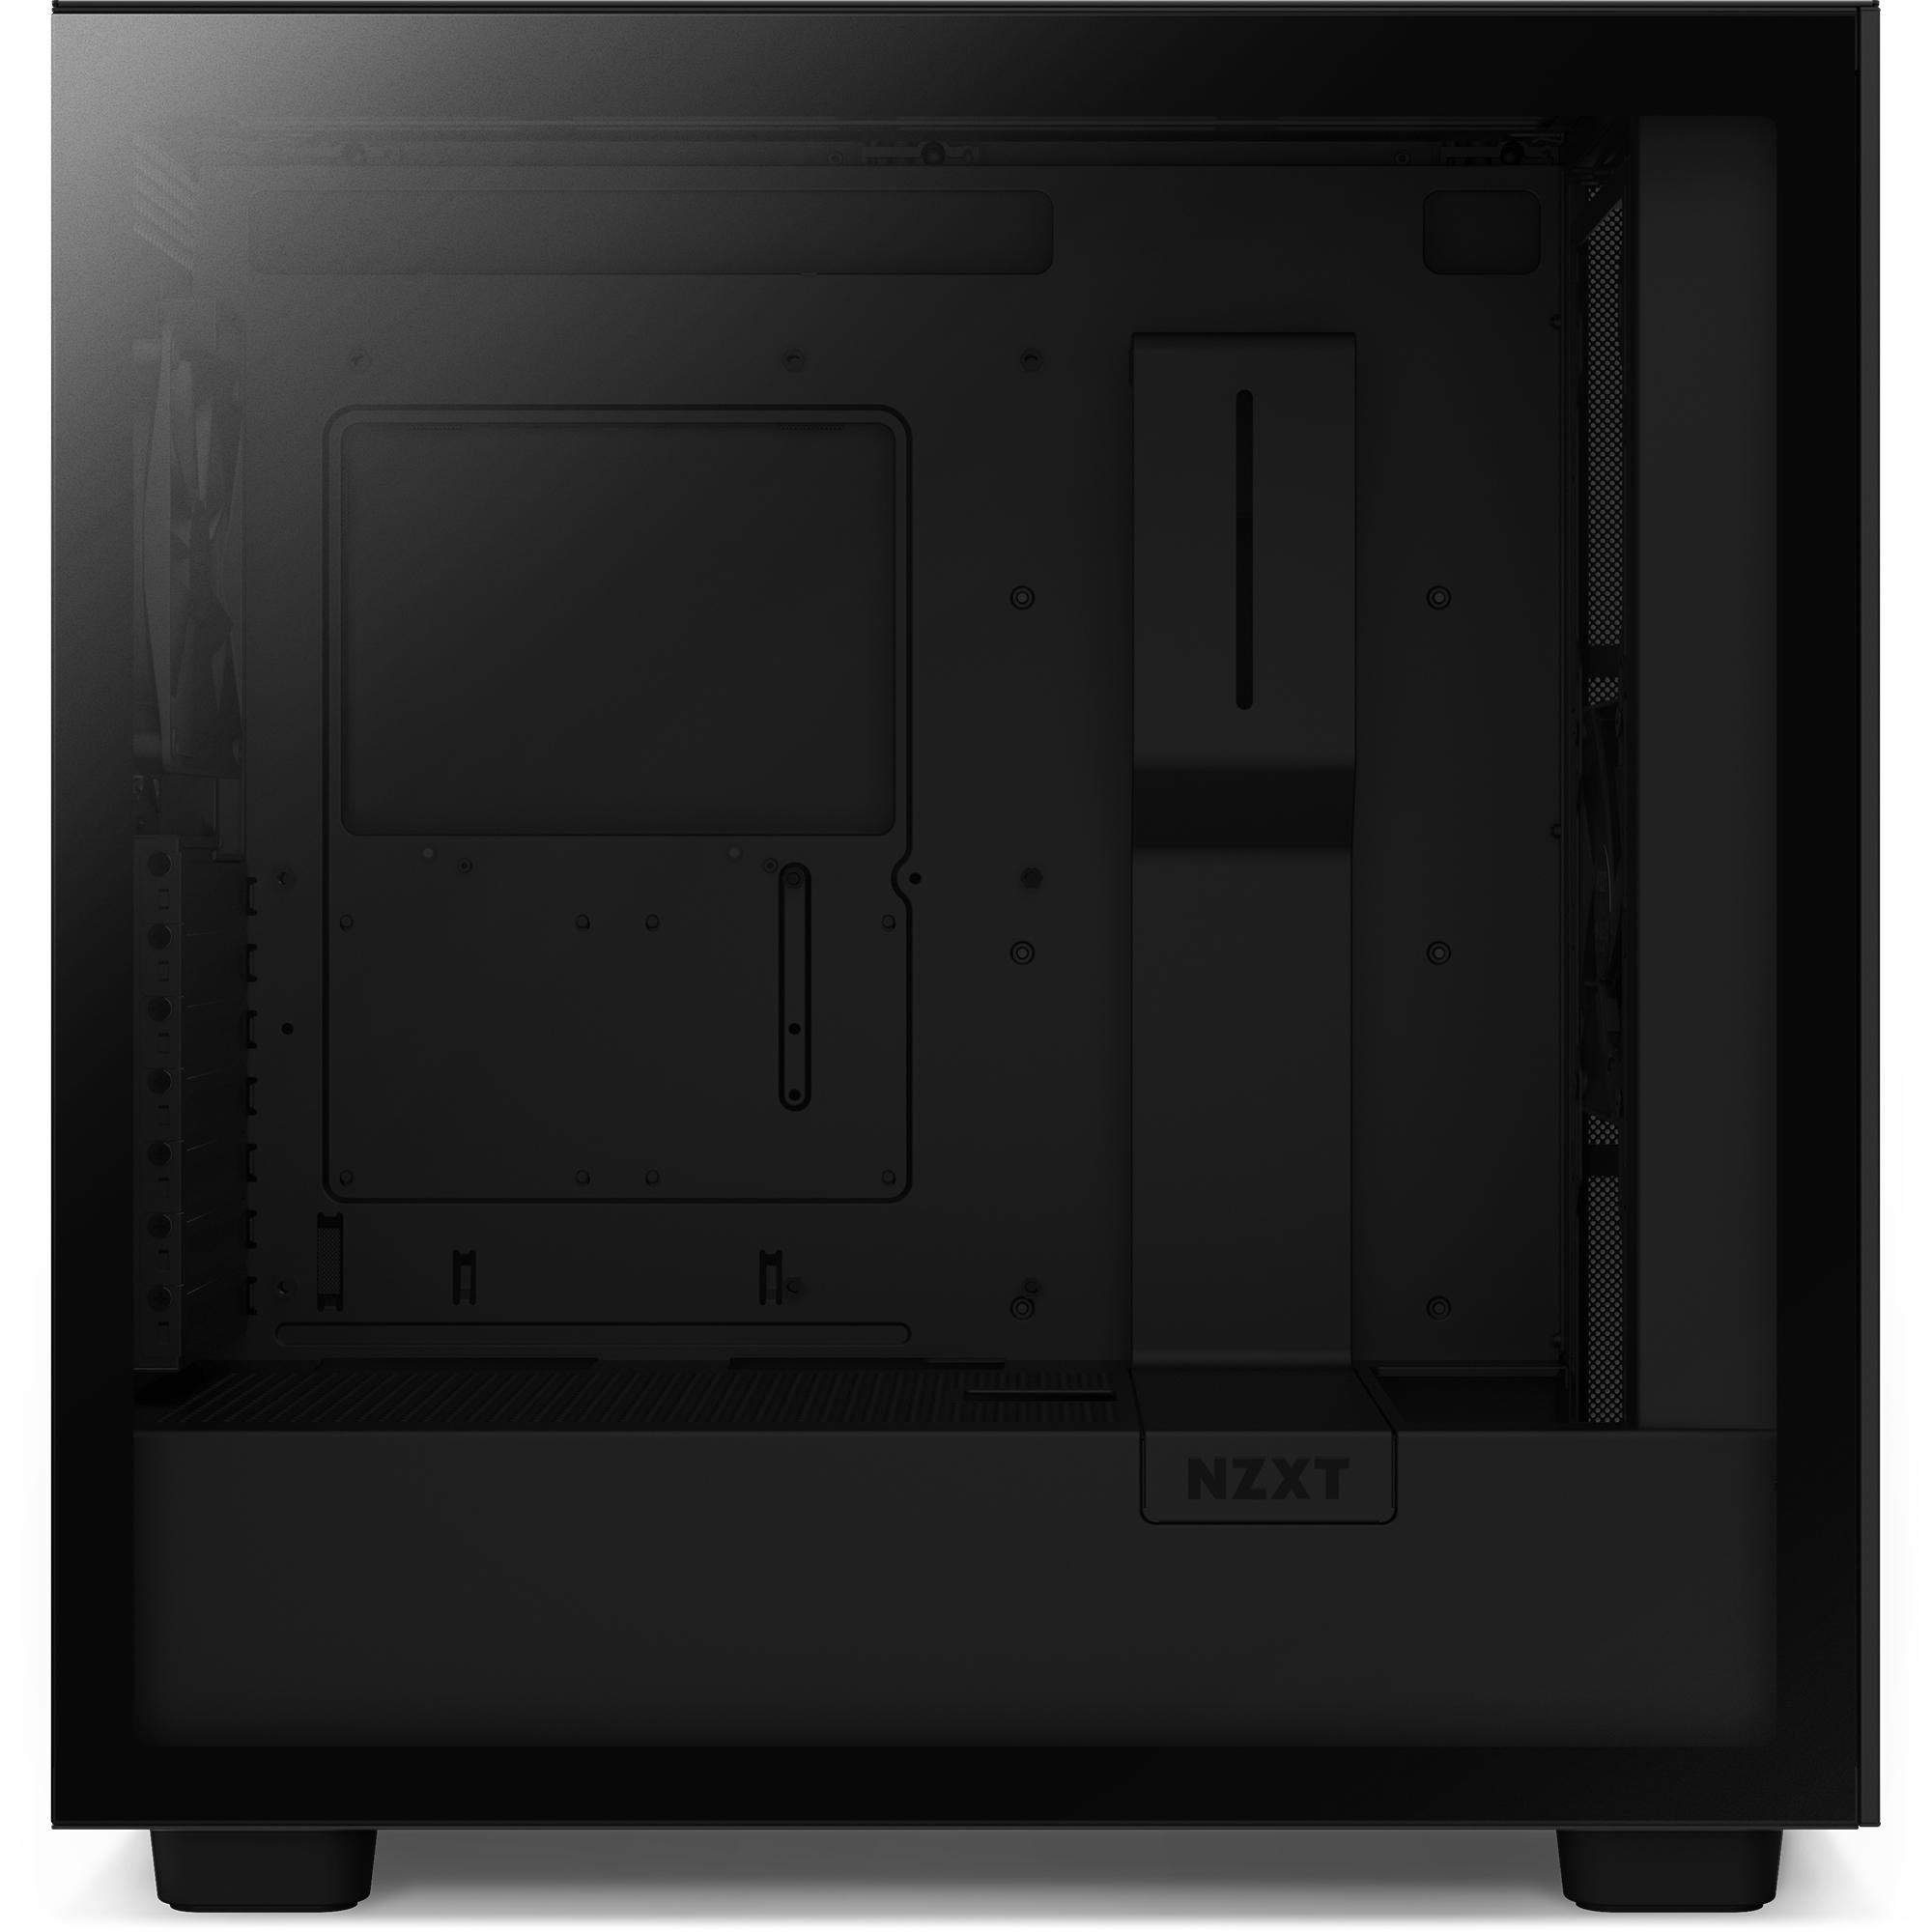 Vỏ case NZXT H7 ATX Mid Tower slide image 2